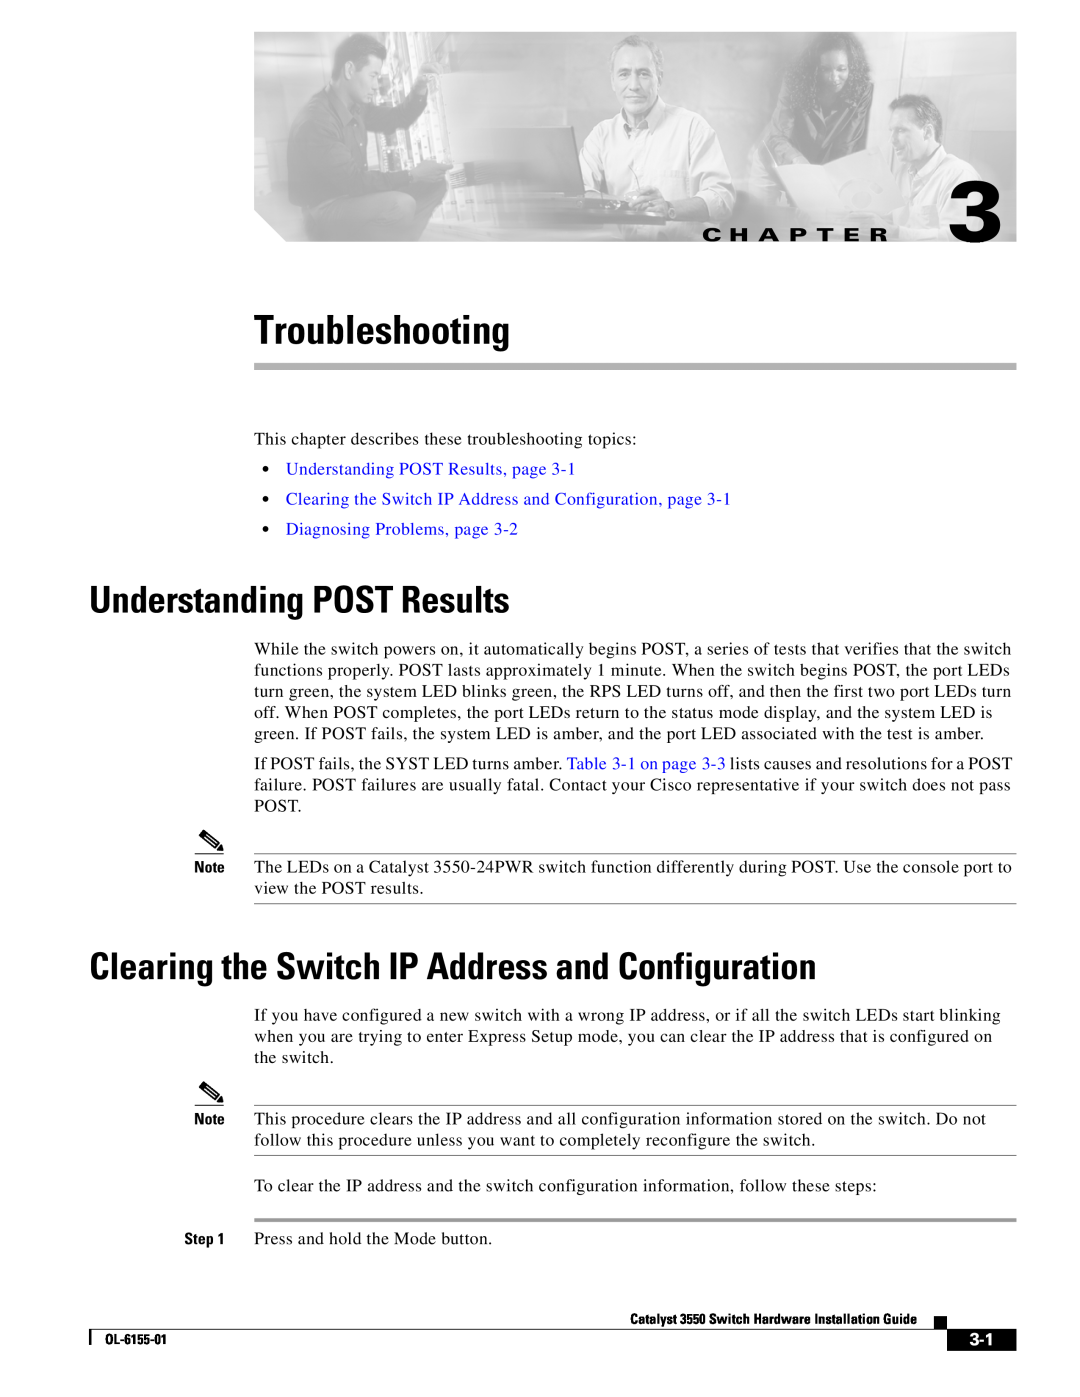 Cisco Systems 3550 manual Troubleshooting, Understanding POST Results, Clearing the Switch IP Address and Configuration 